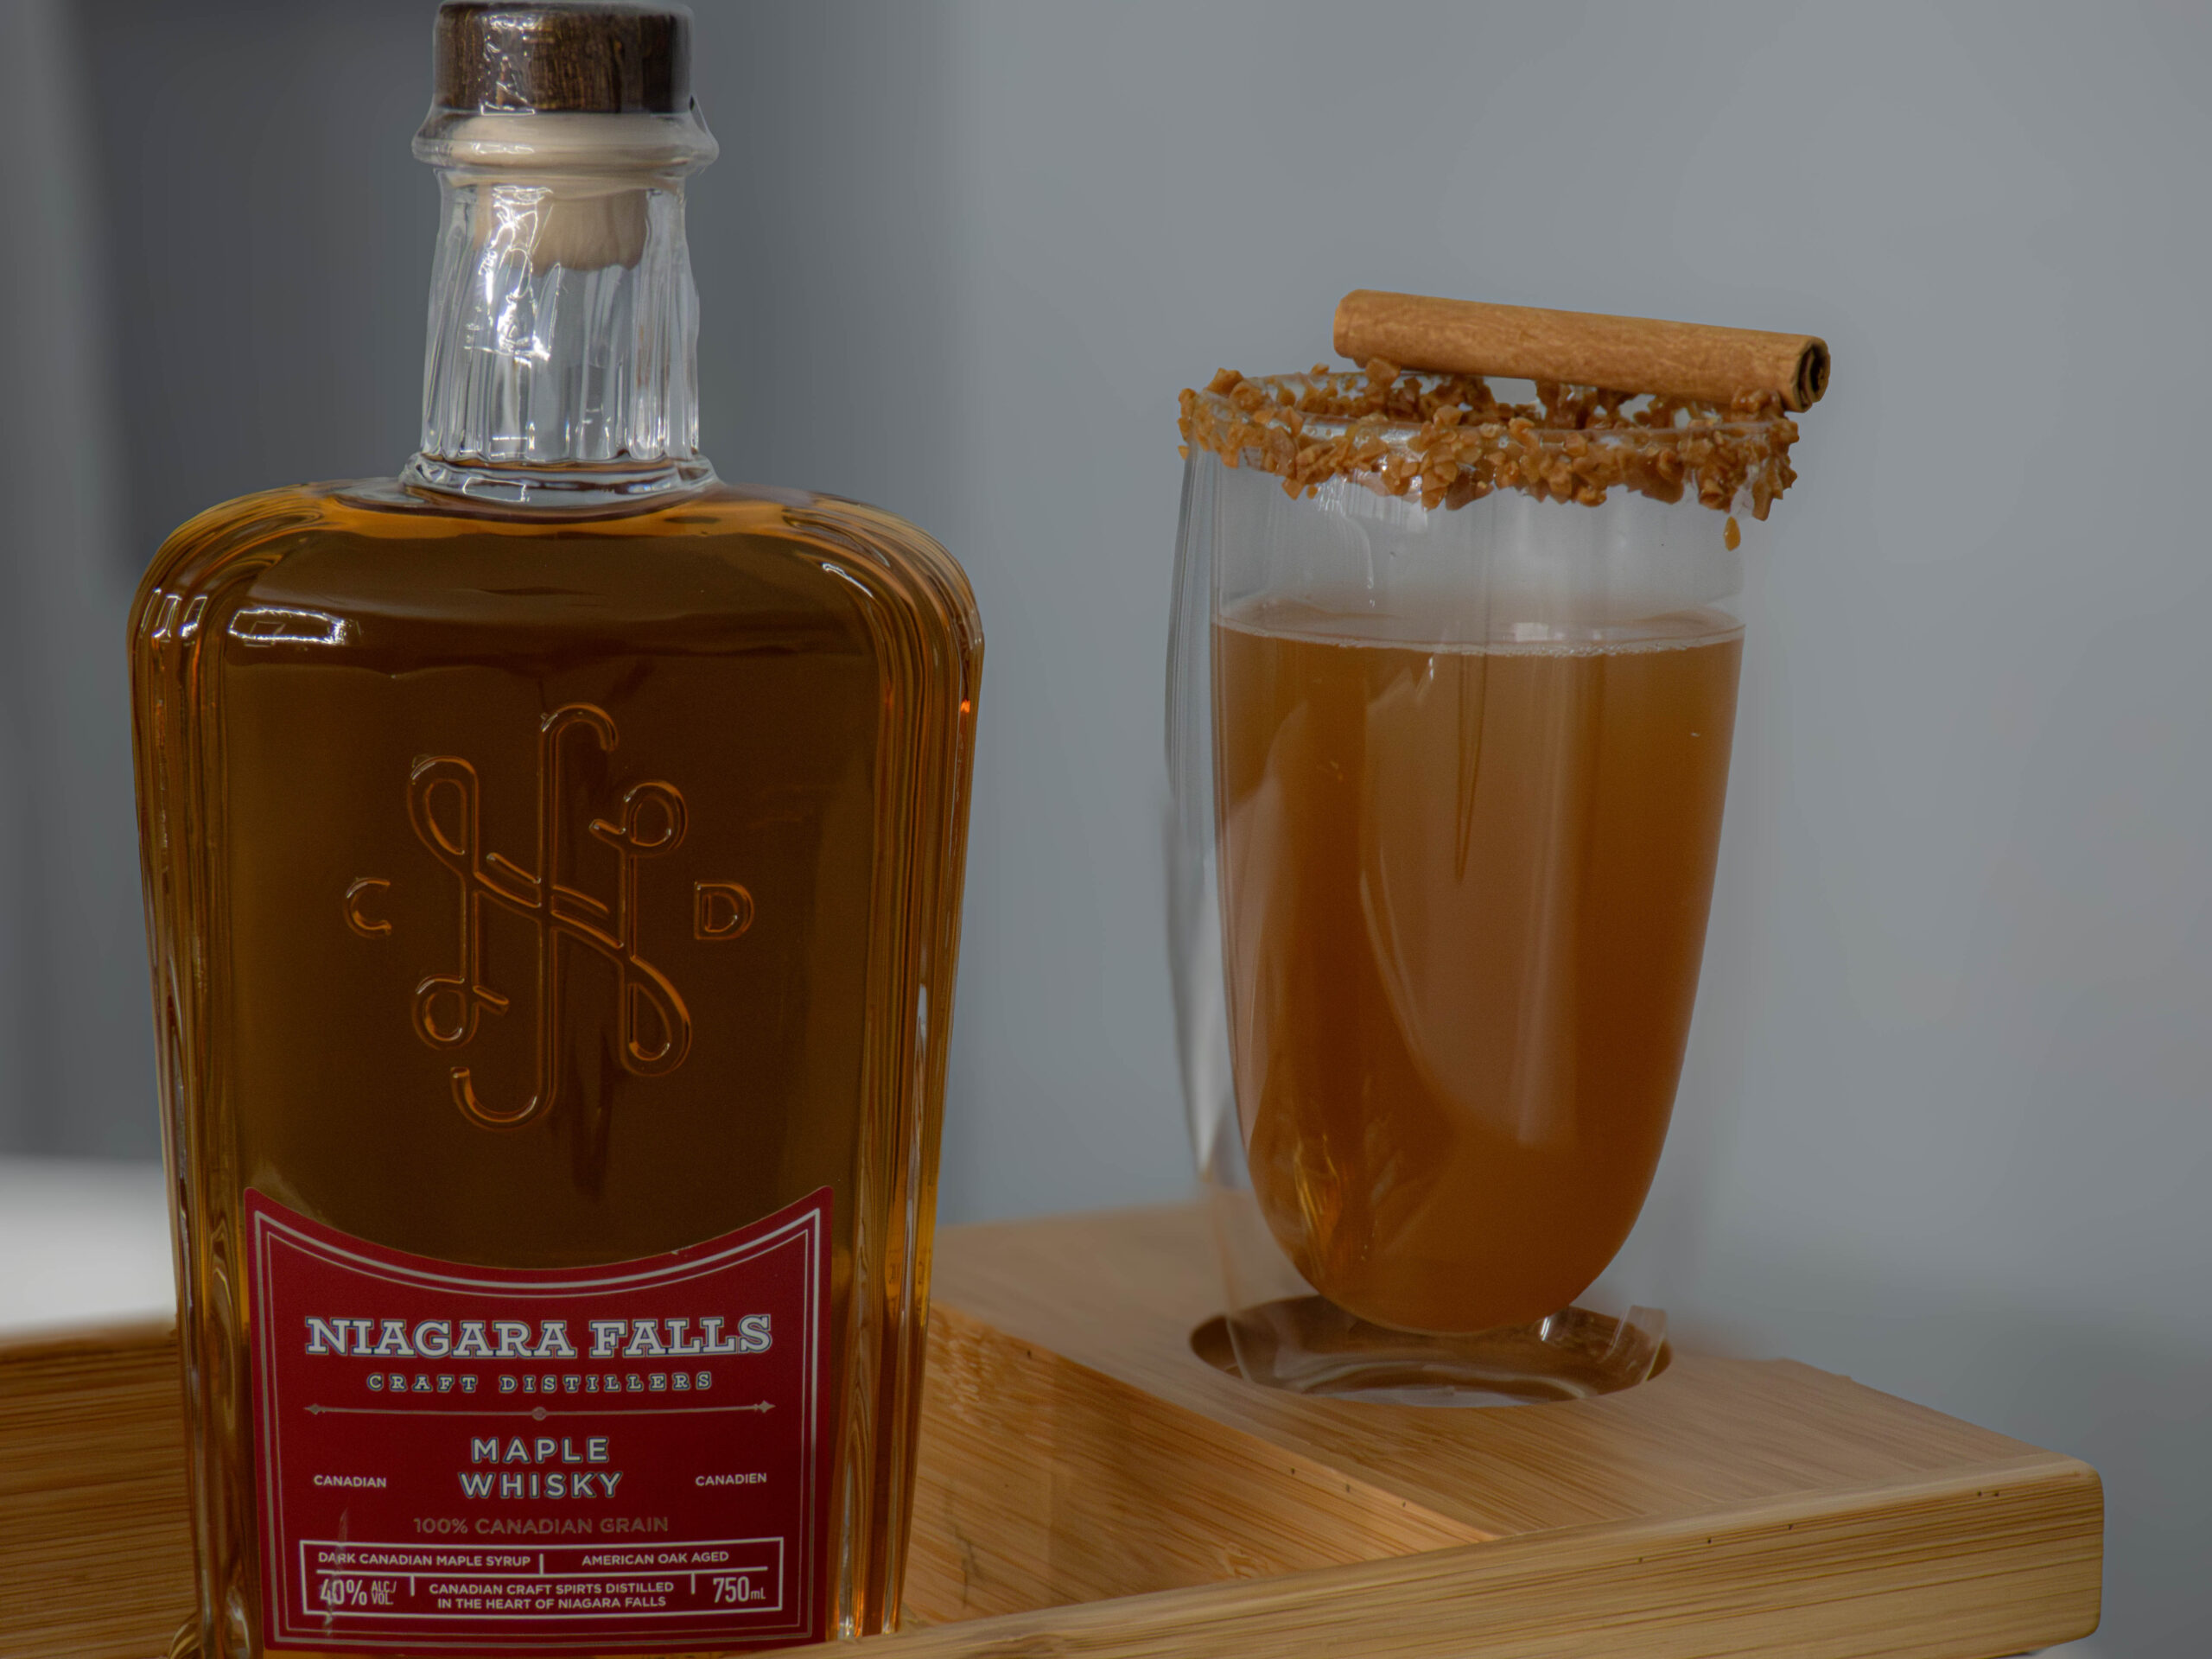 Three Festive Cocktails Made with Locally Crafted Coureur des Bois Maple  Whisky